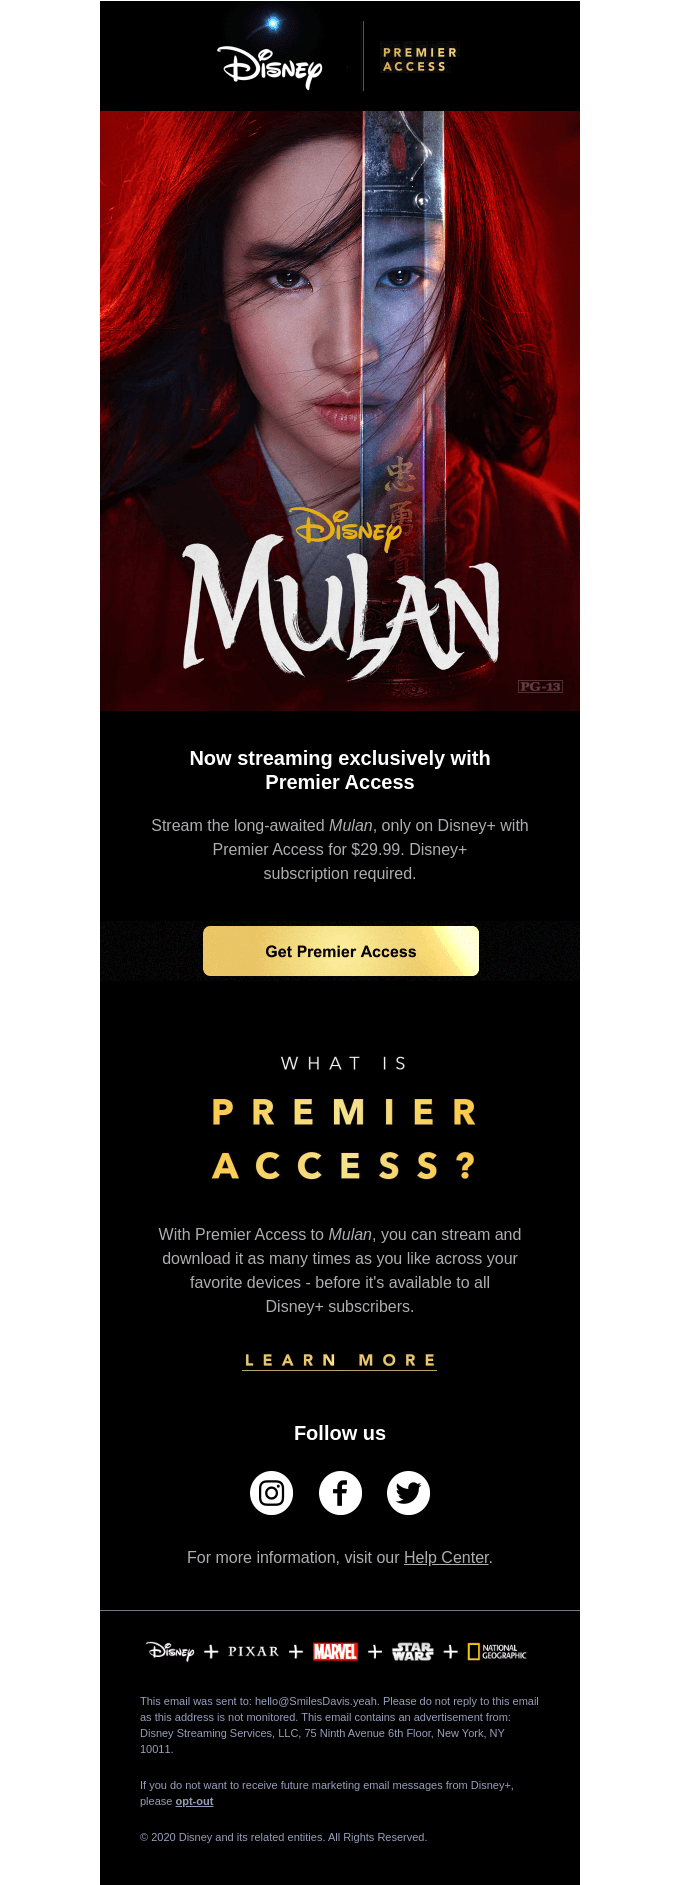 Get early access to Mulan